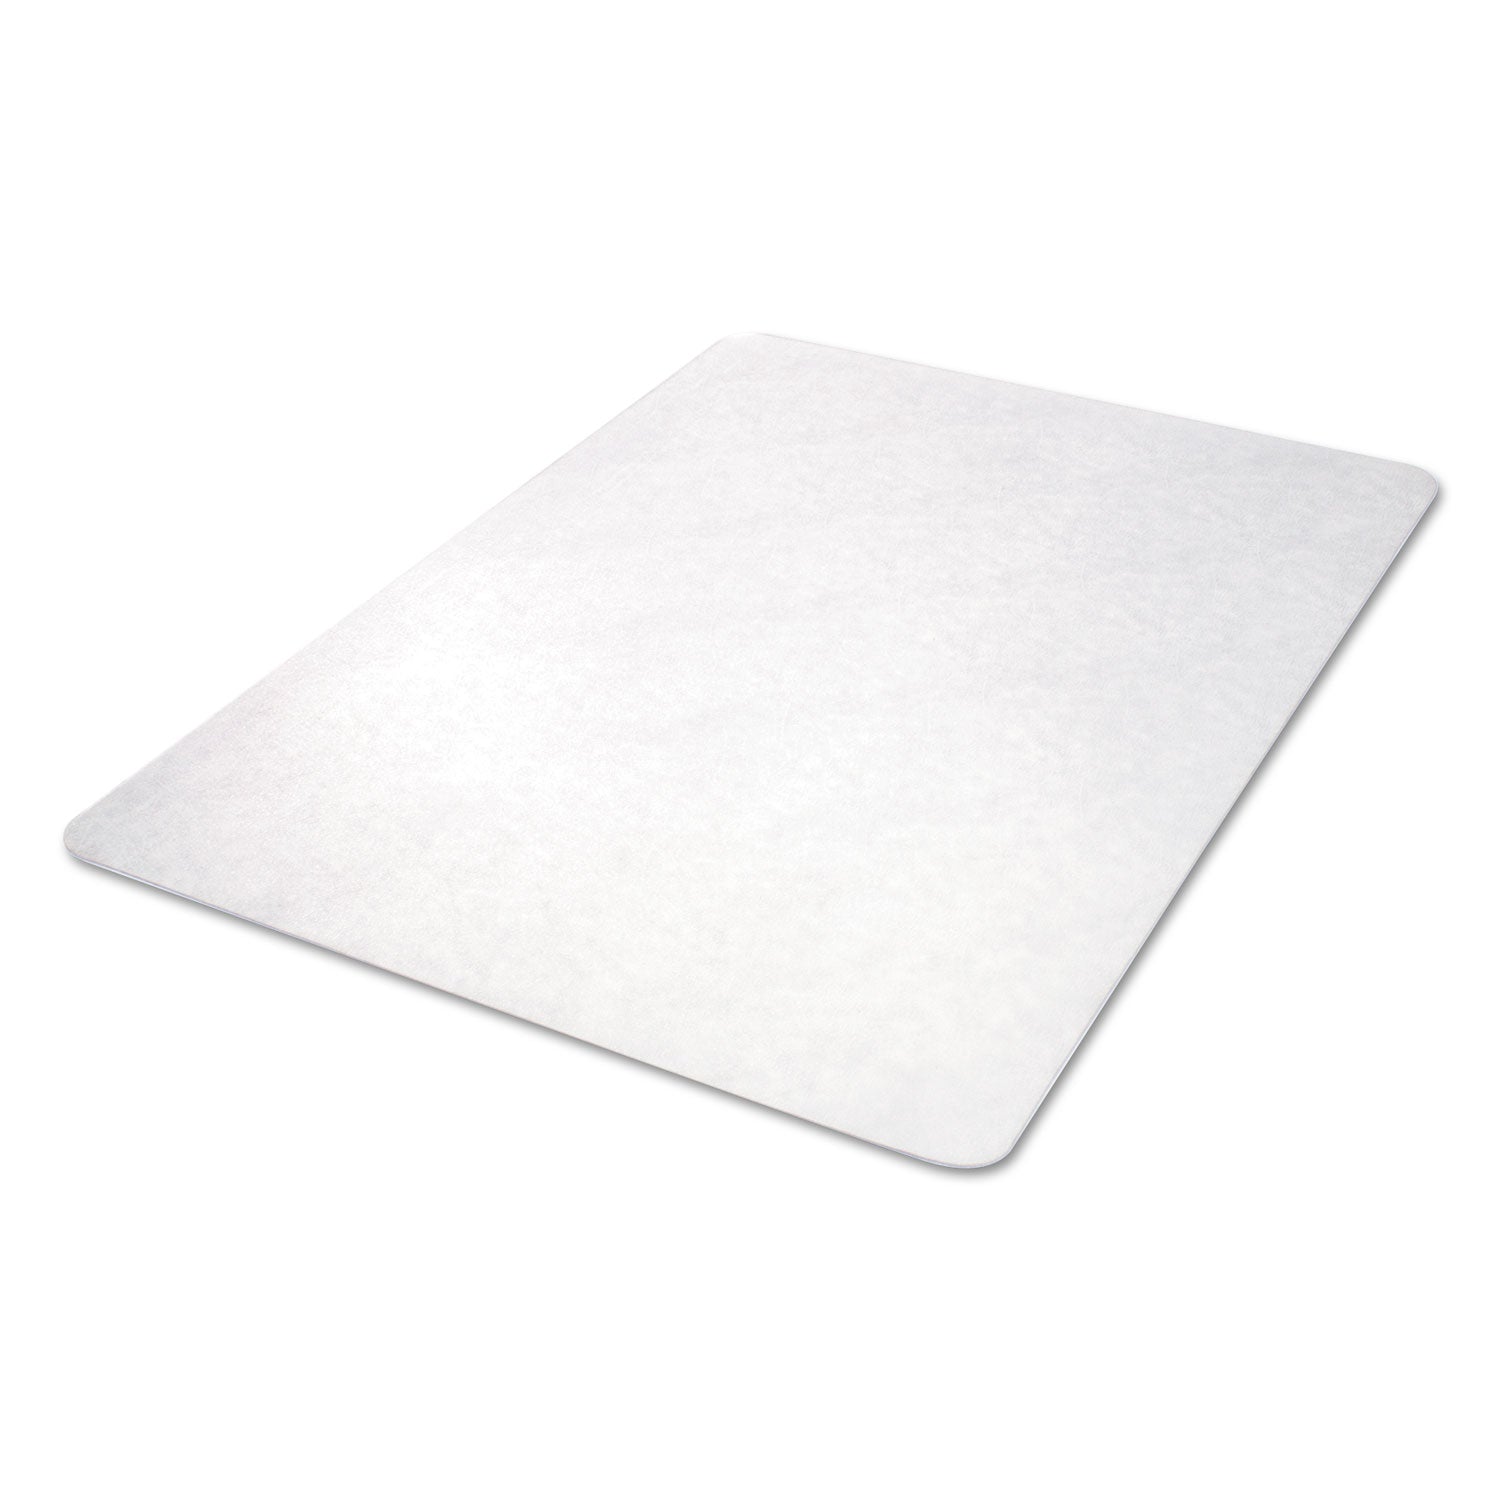 all-day-use-non-studded-chair-mat-for-hard-floors-46-x-60-rectangular-clear_alemat4660hfr - 7